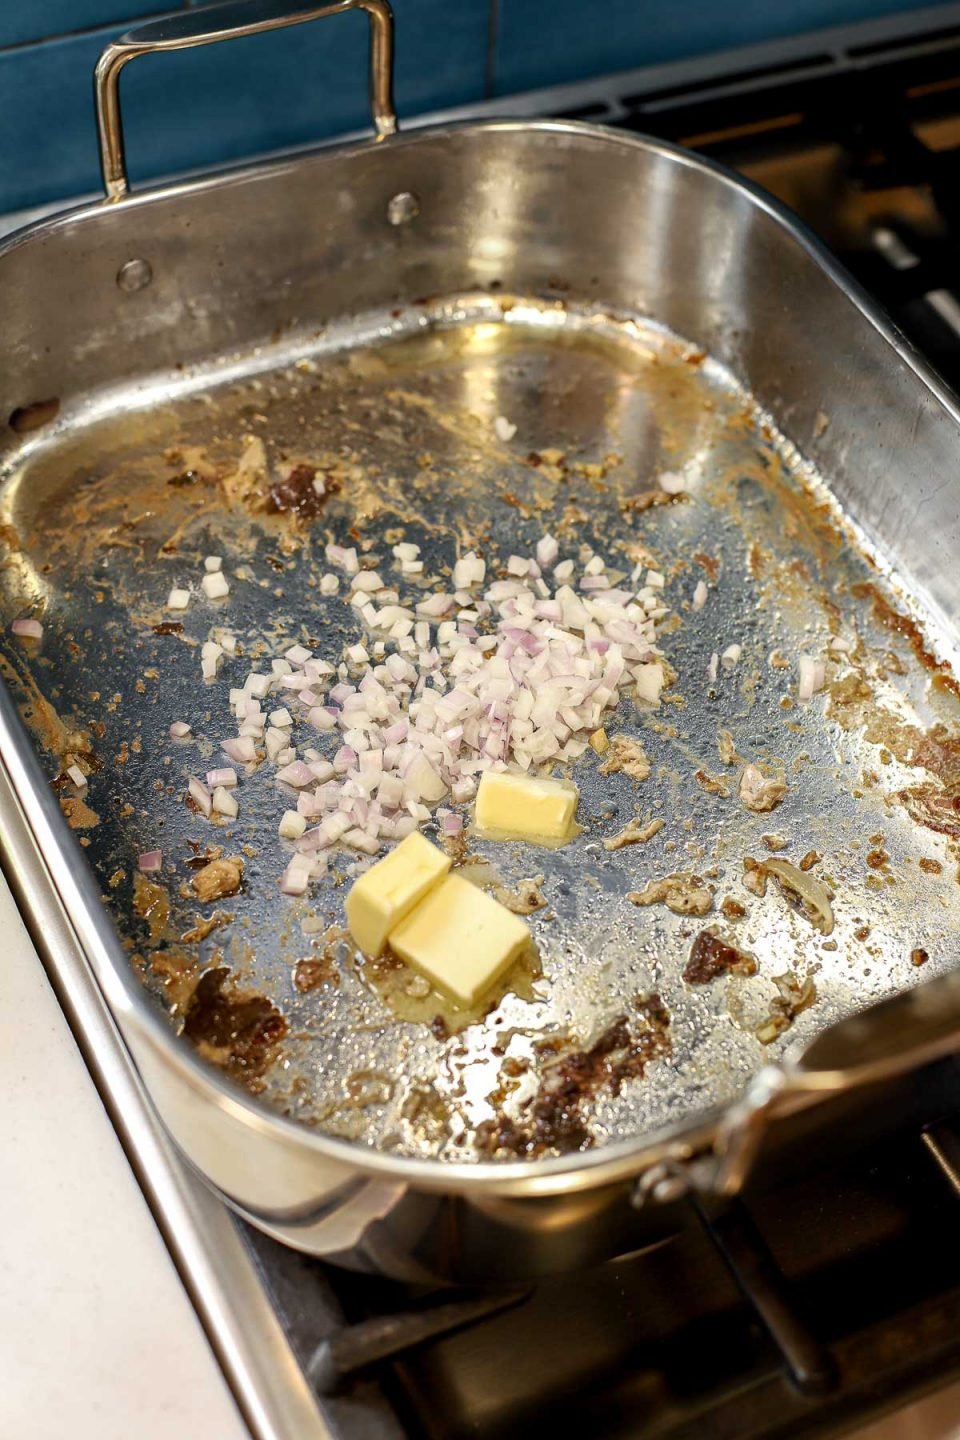 How to Make Easy Turkey Gravy, step 3: A roasting pan is placed over two burners on a stove top over low heat. Chopped shallots and unsalted butter are added to the roasting pan to cook along with some of the leftover turkey fat.